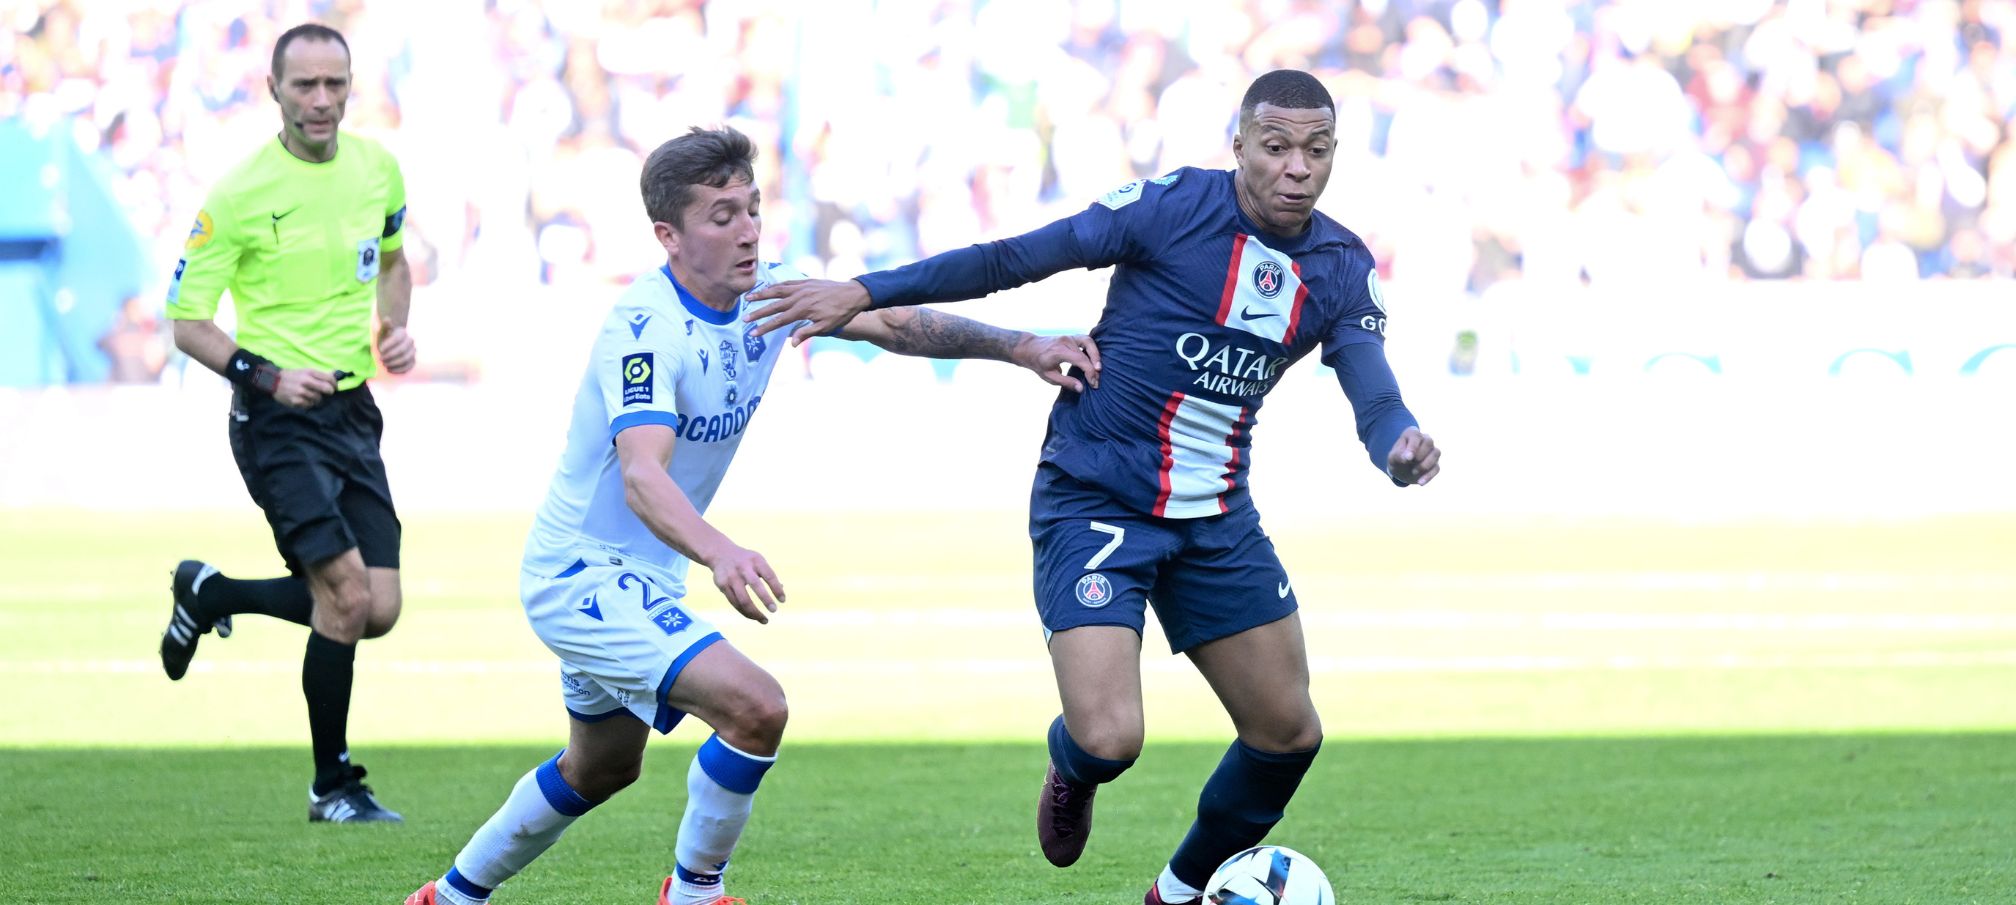 Auxerre-PSG preview: Title in sight for Paris